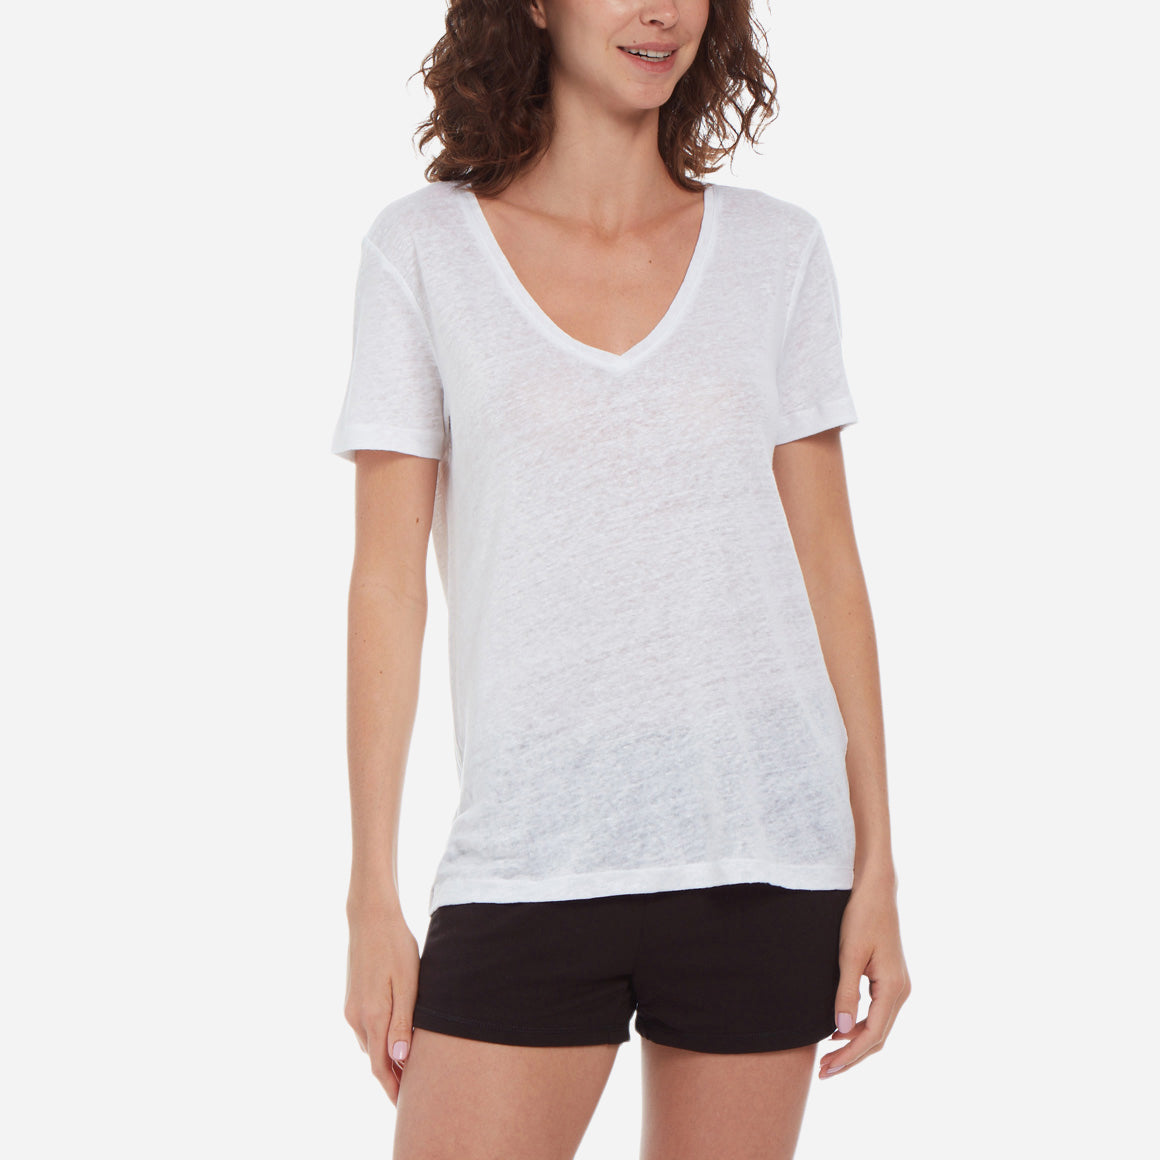  Front-facing model wearing a white linen v-neck tee and black shorts.